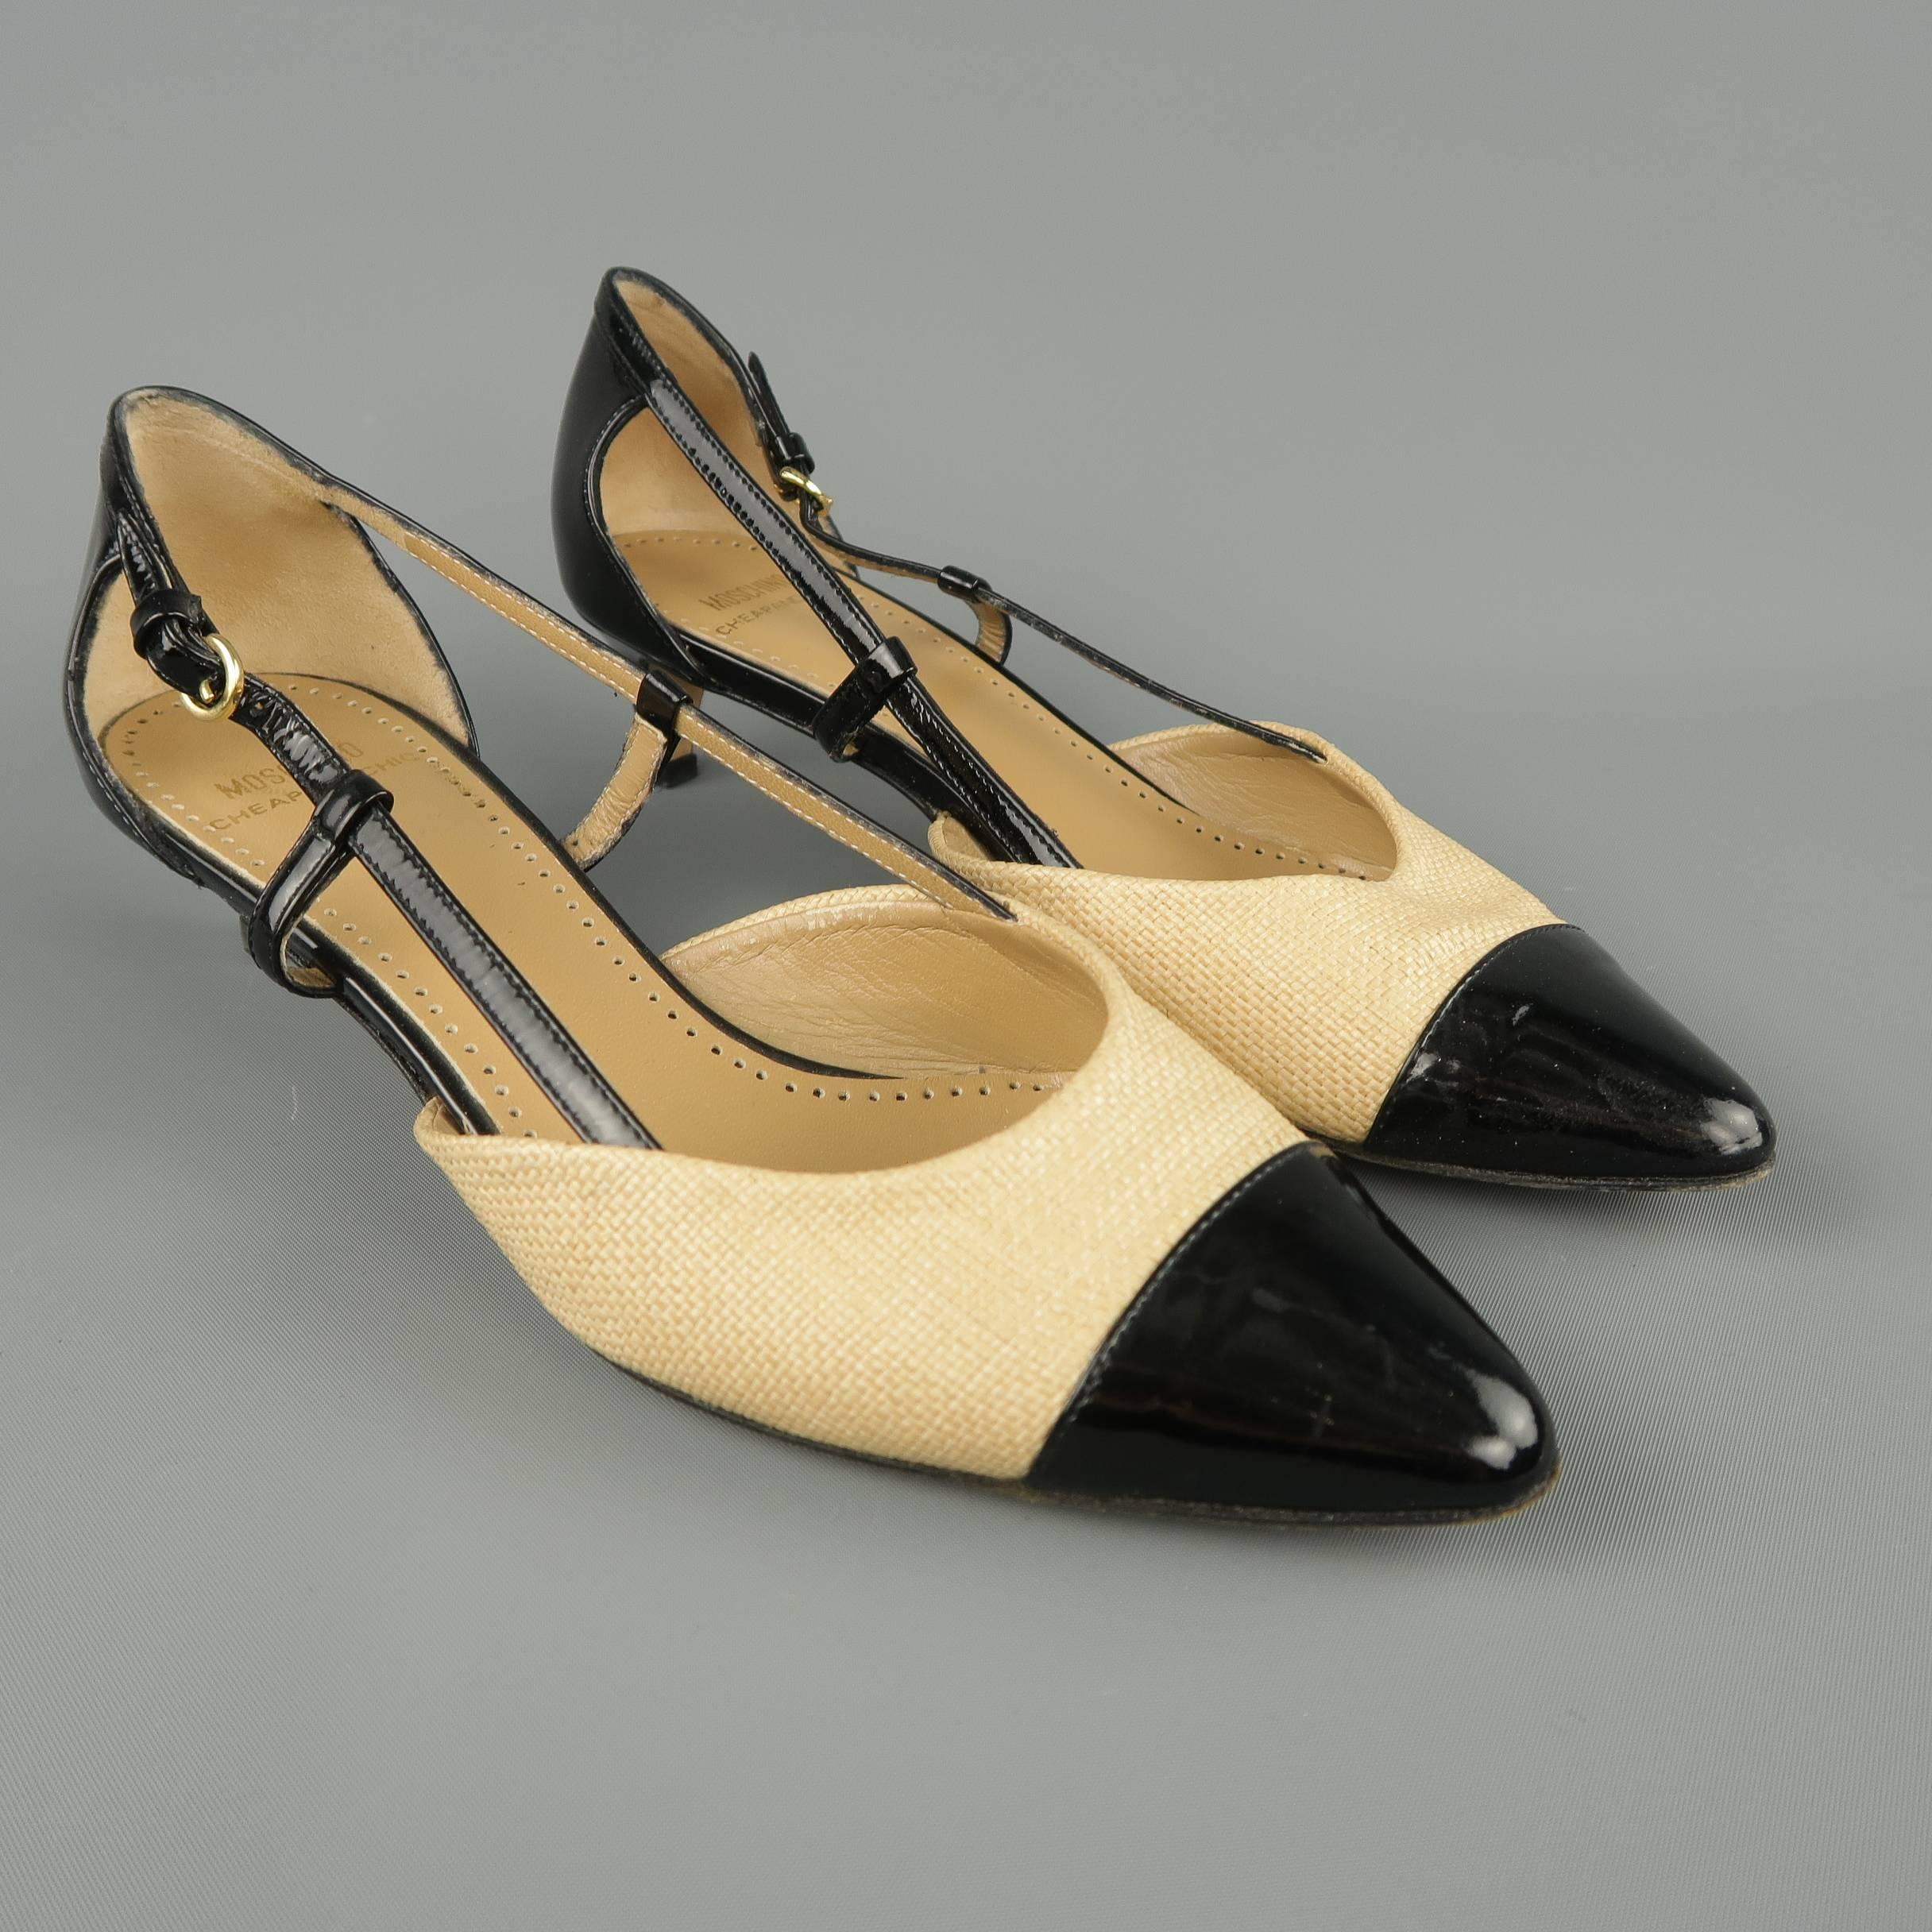 MOSCHINO CHEAP & CHIC pumps come in beige woven fabric with a pointed toe, black patent leather strap sides, and kitten heel. Made in Italy.
 
Good Pre-Owned Condition.
Marked: IT 37
 
Measurements:
 
Heel: 1 in.
